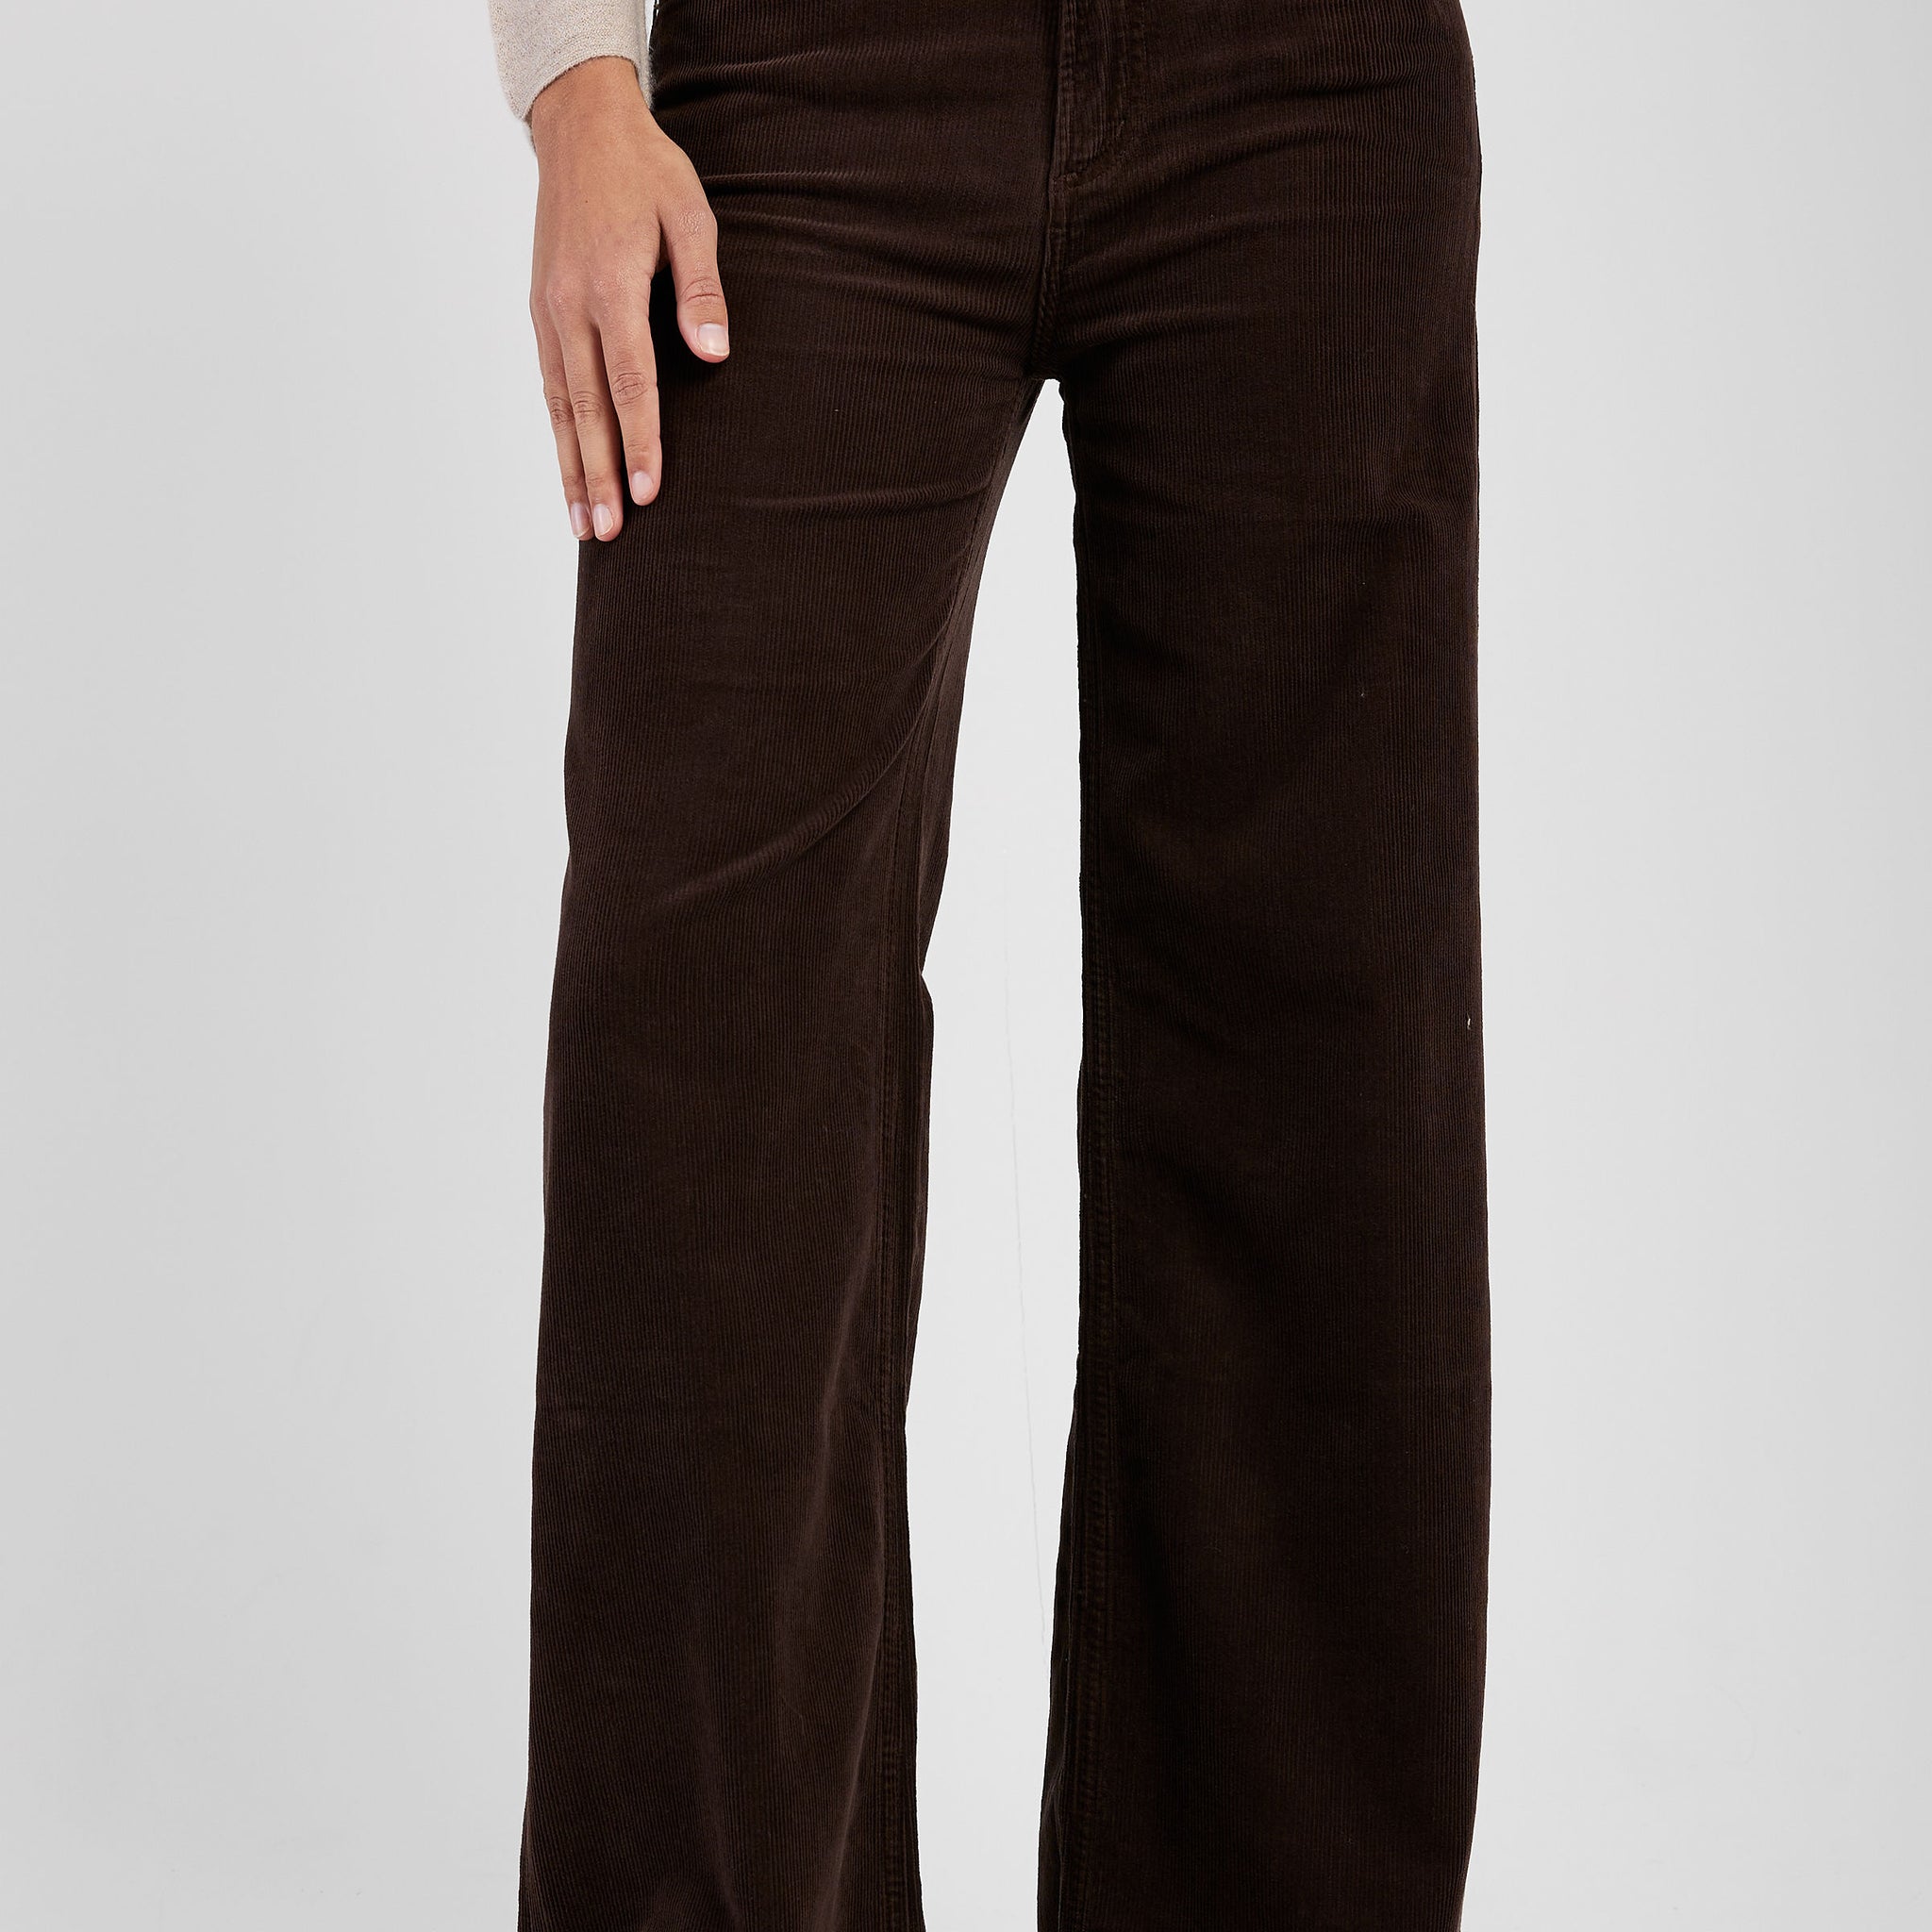 CITIZENS OF HUMANITY Corduroy Paloma Baggy Pant in Dark Brown